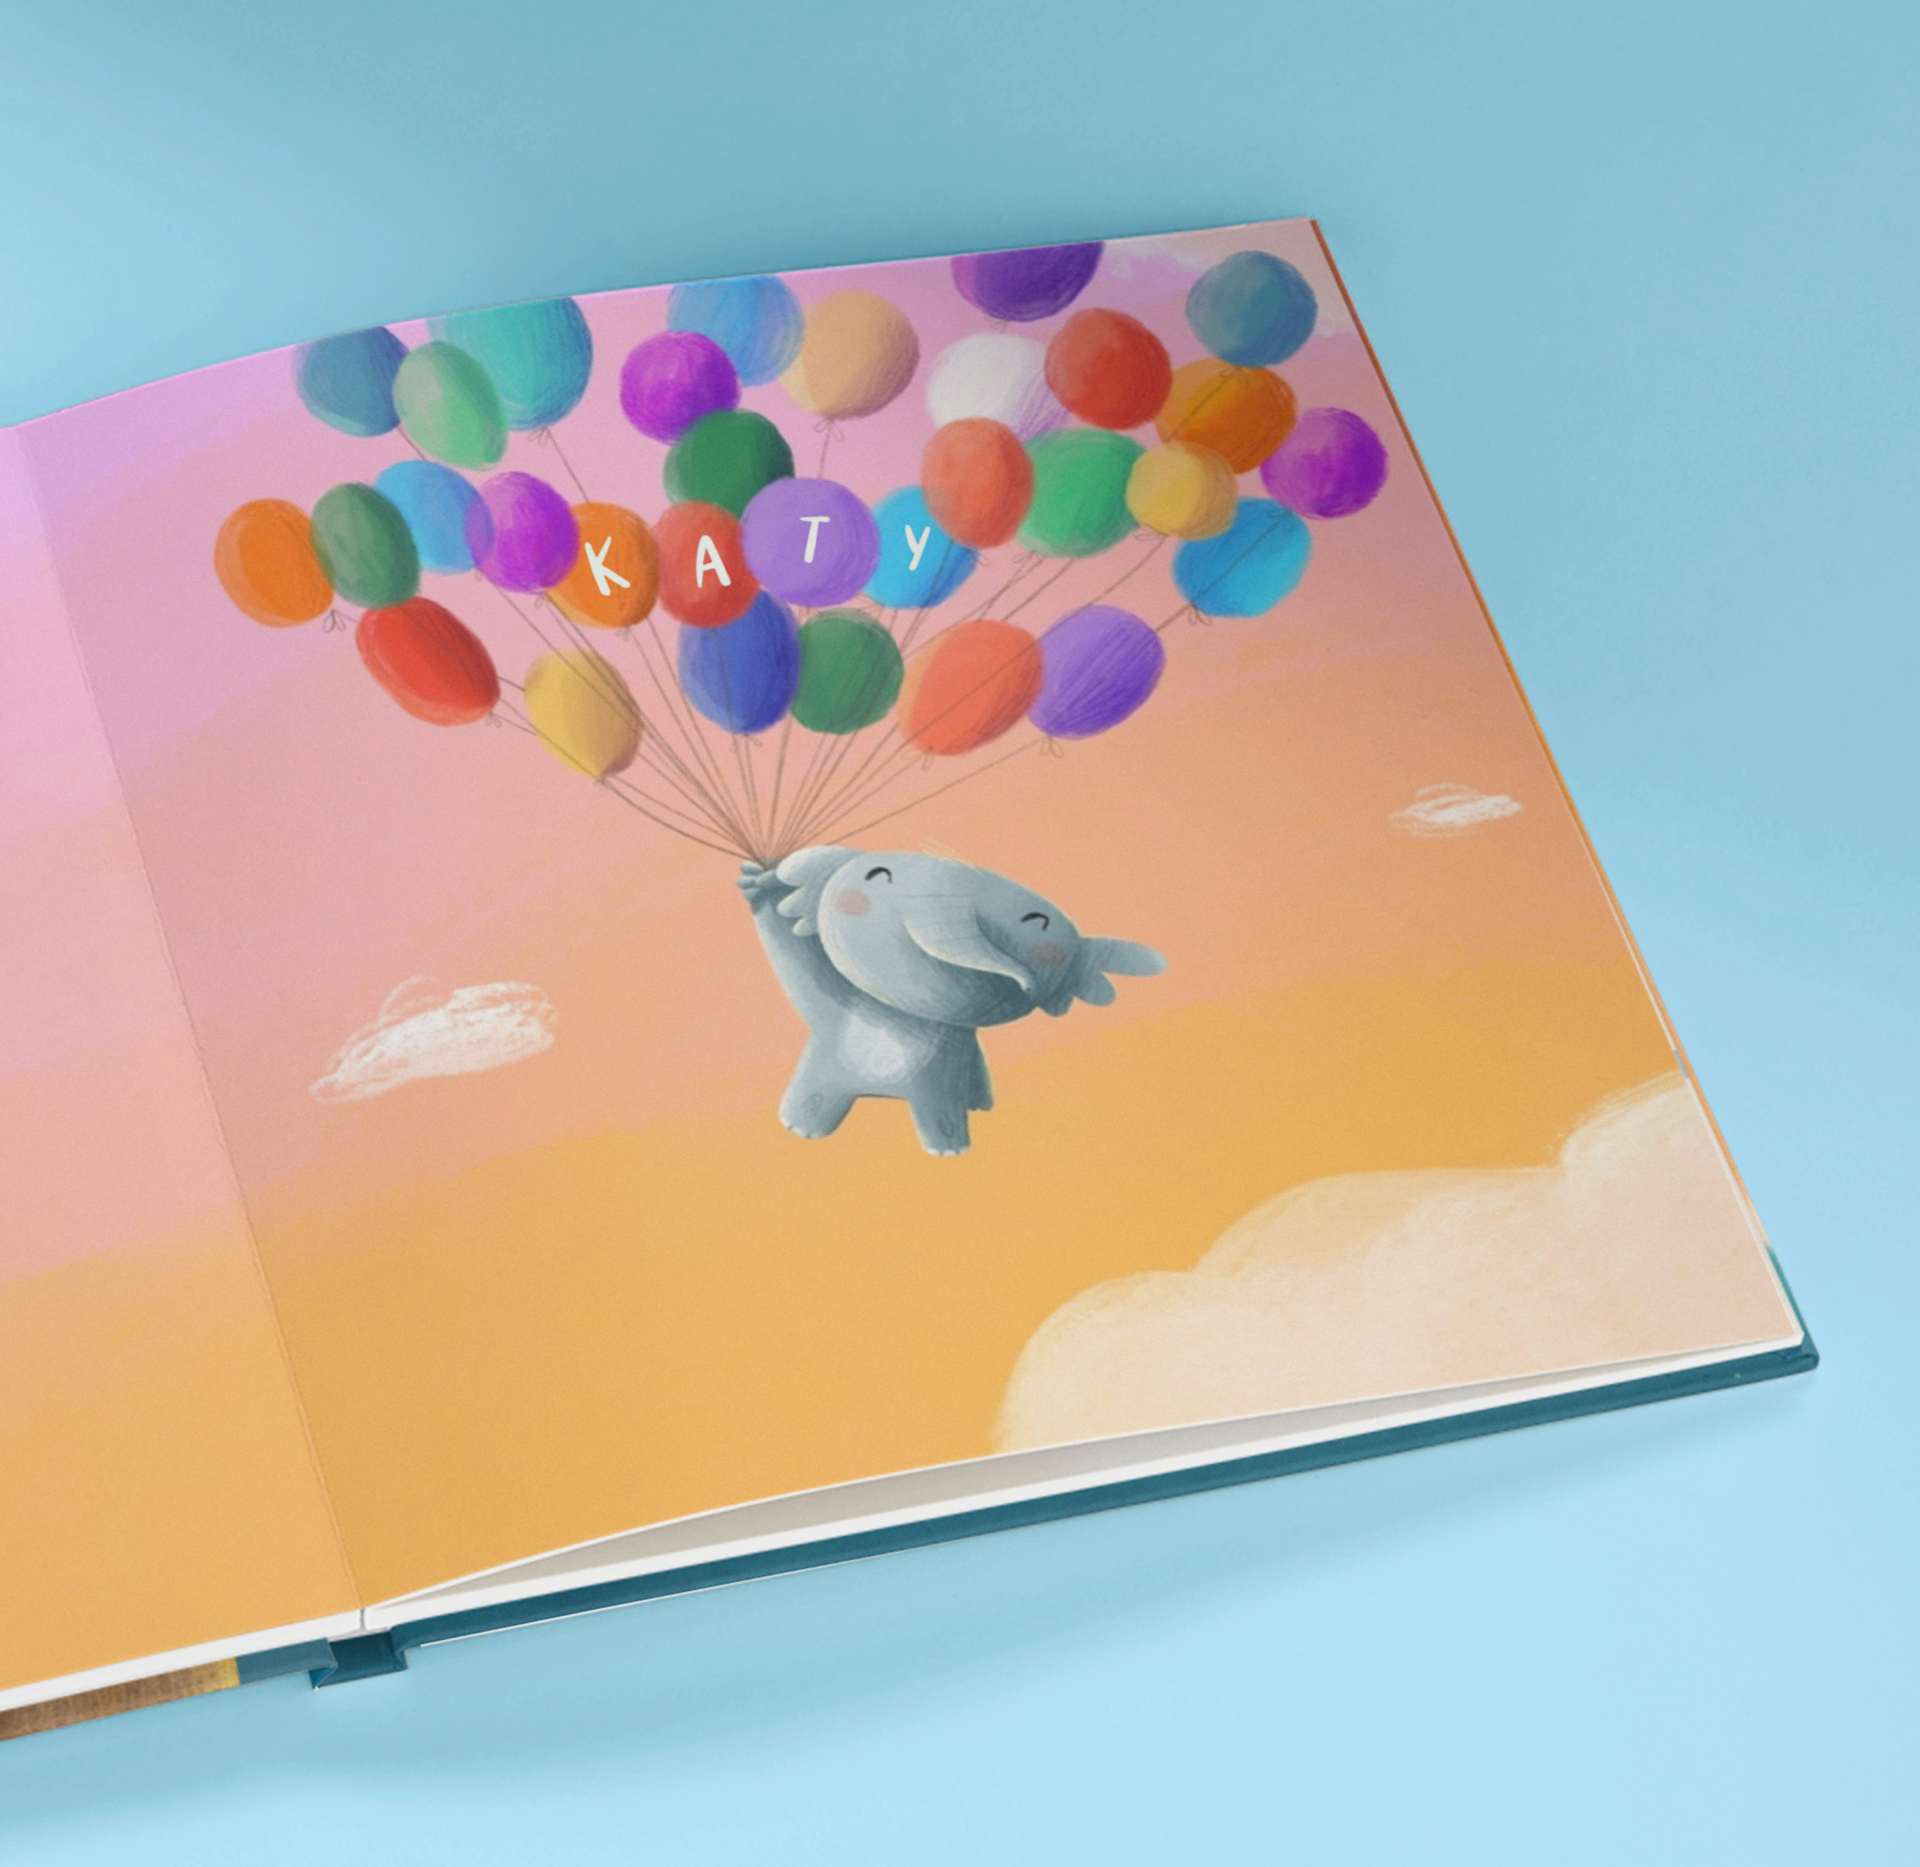 Page with elephant holding balloons